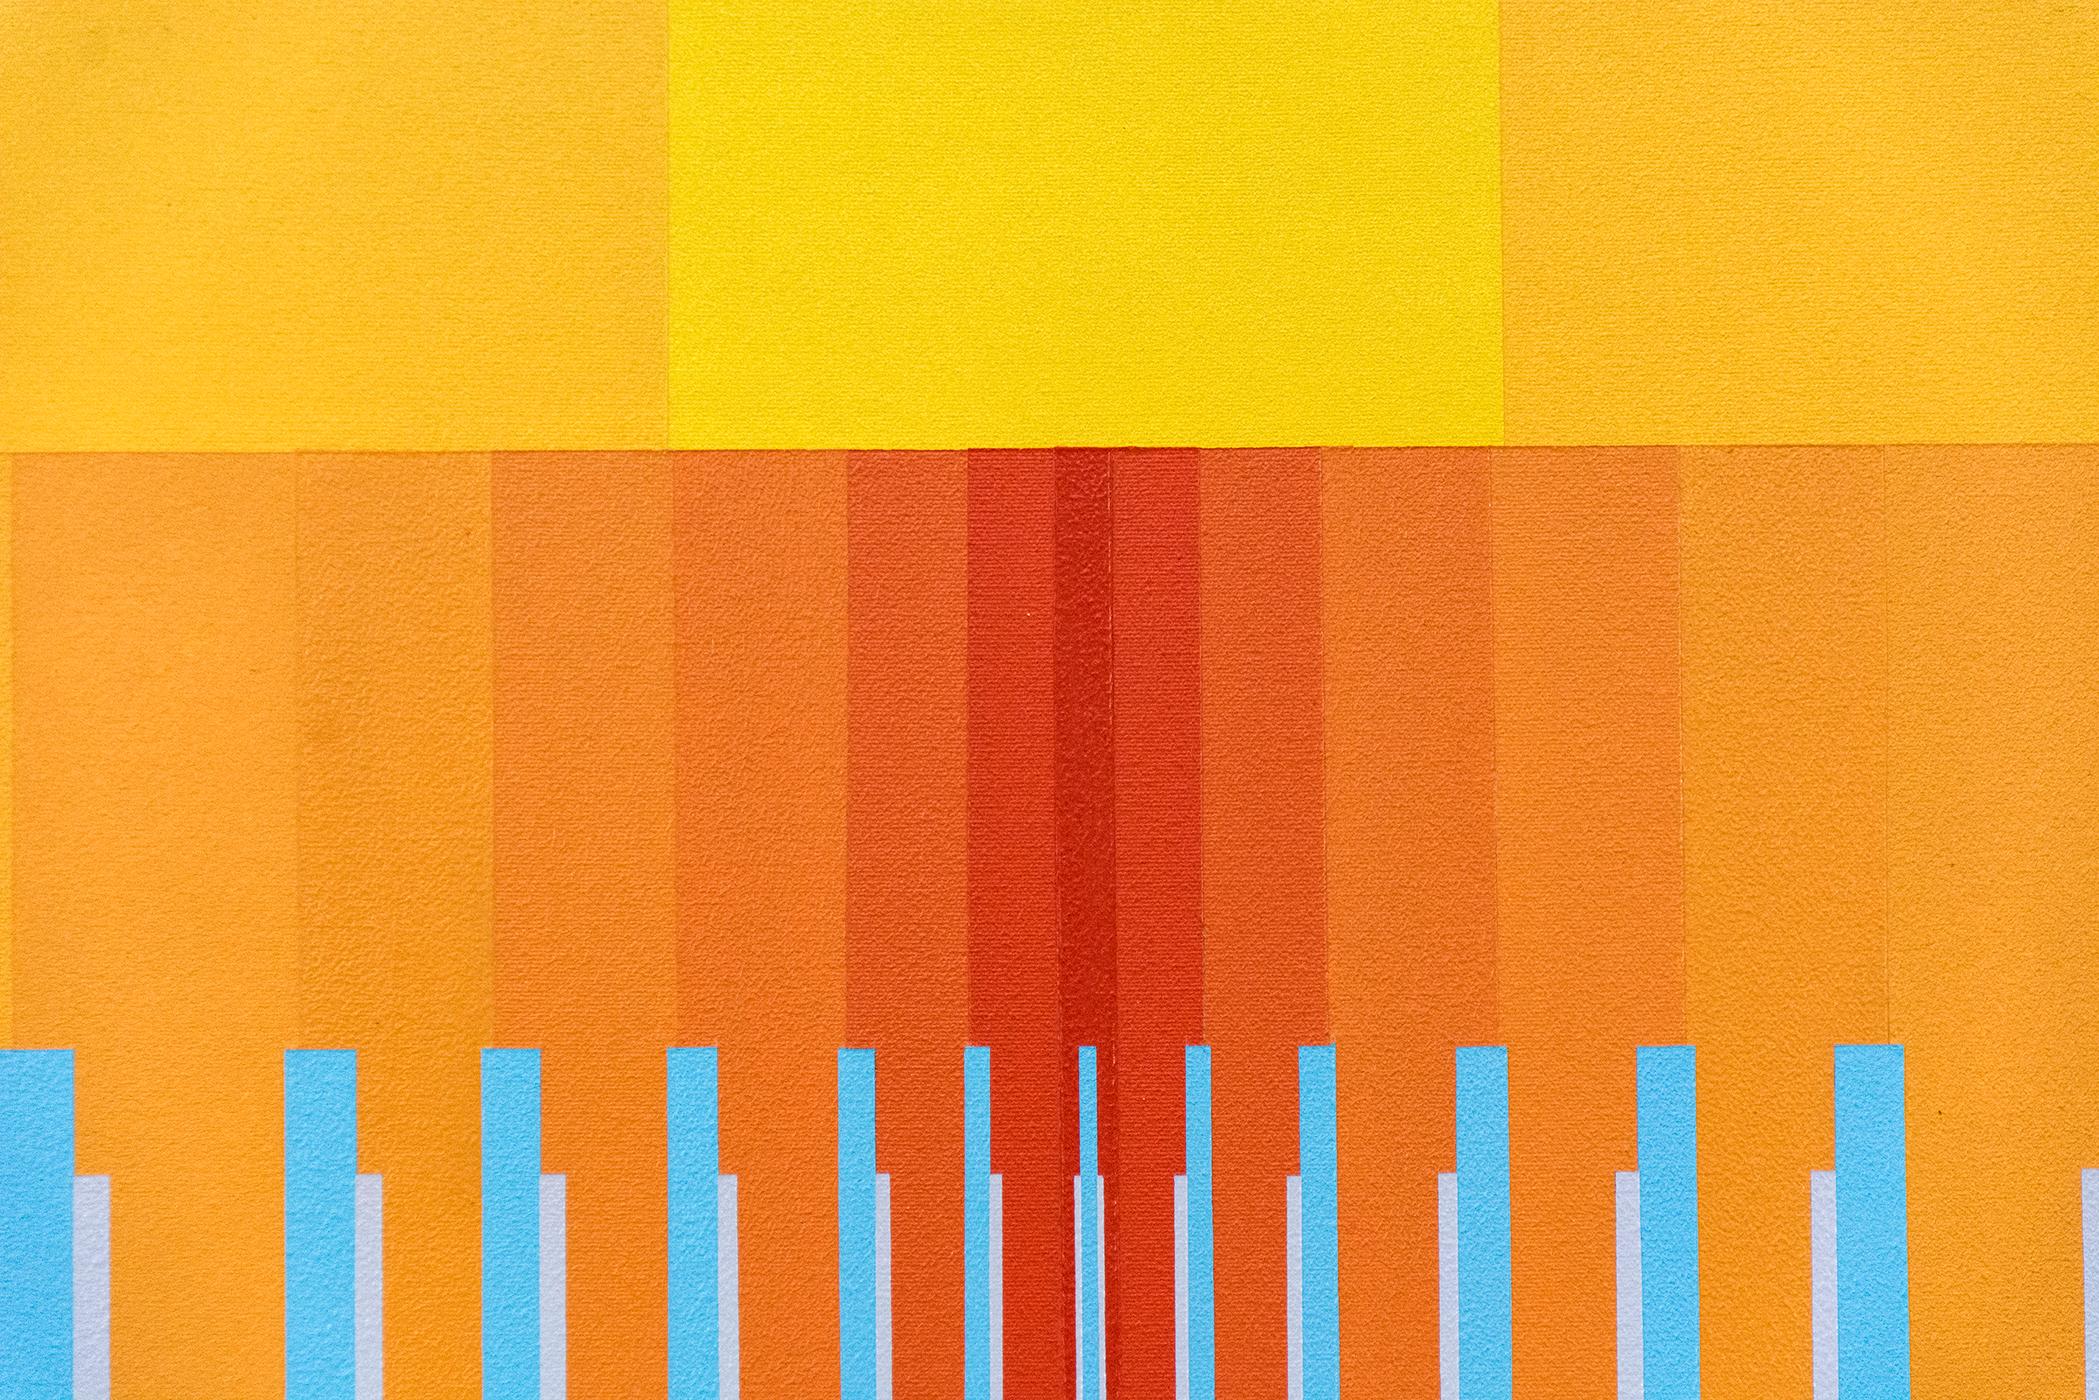 Chorale No 4 - bright, geometric abstraction, modernist acrylic on canvas - Contemporary Painting by Burton Kramer